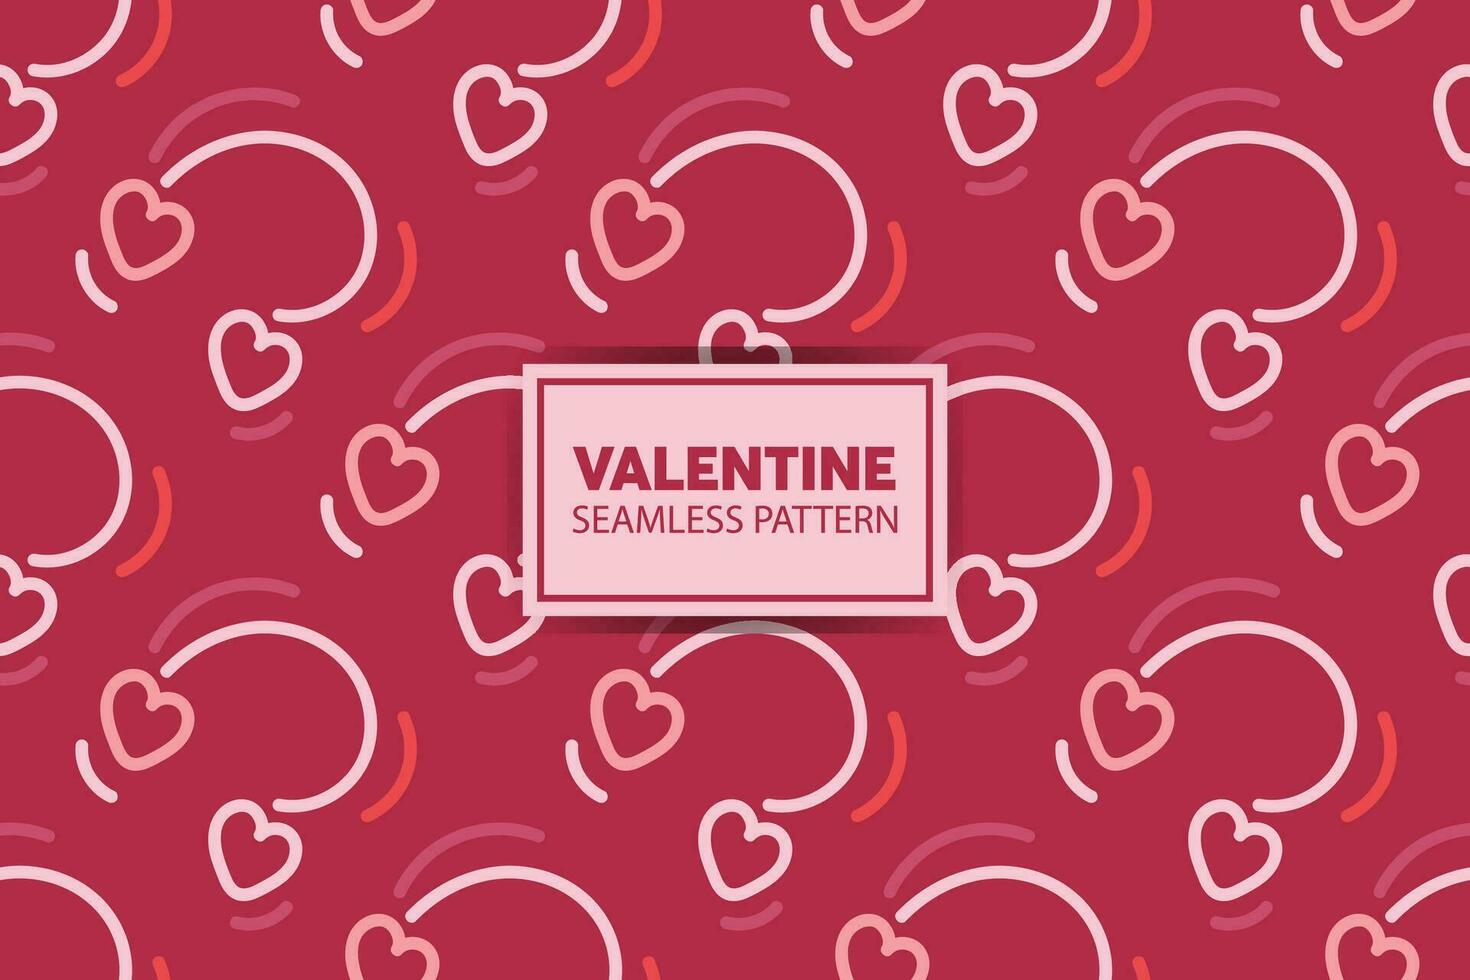 seamless pattern background of hearts with cute style in pink color vector